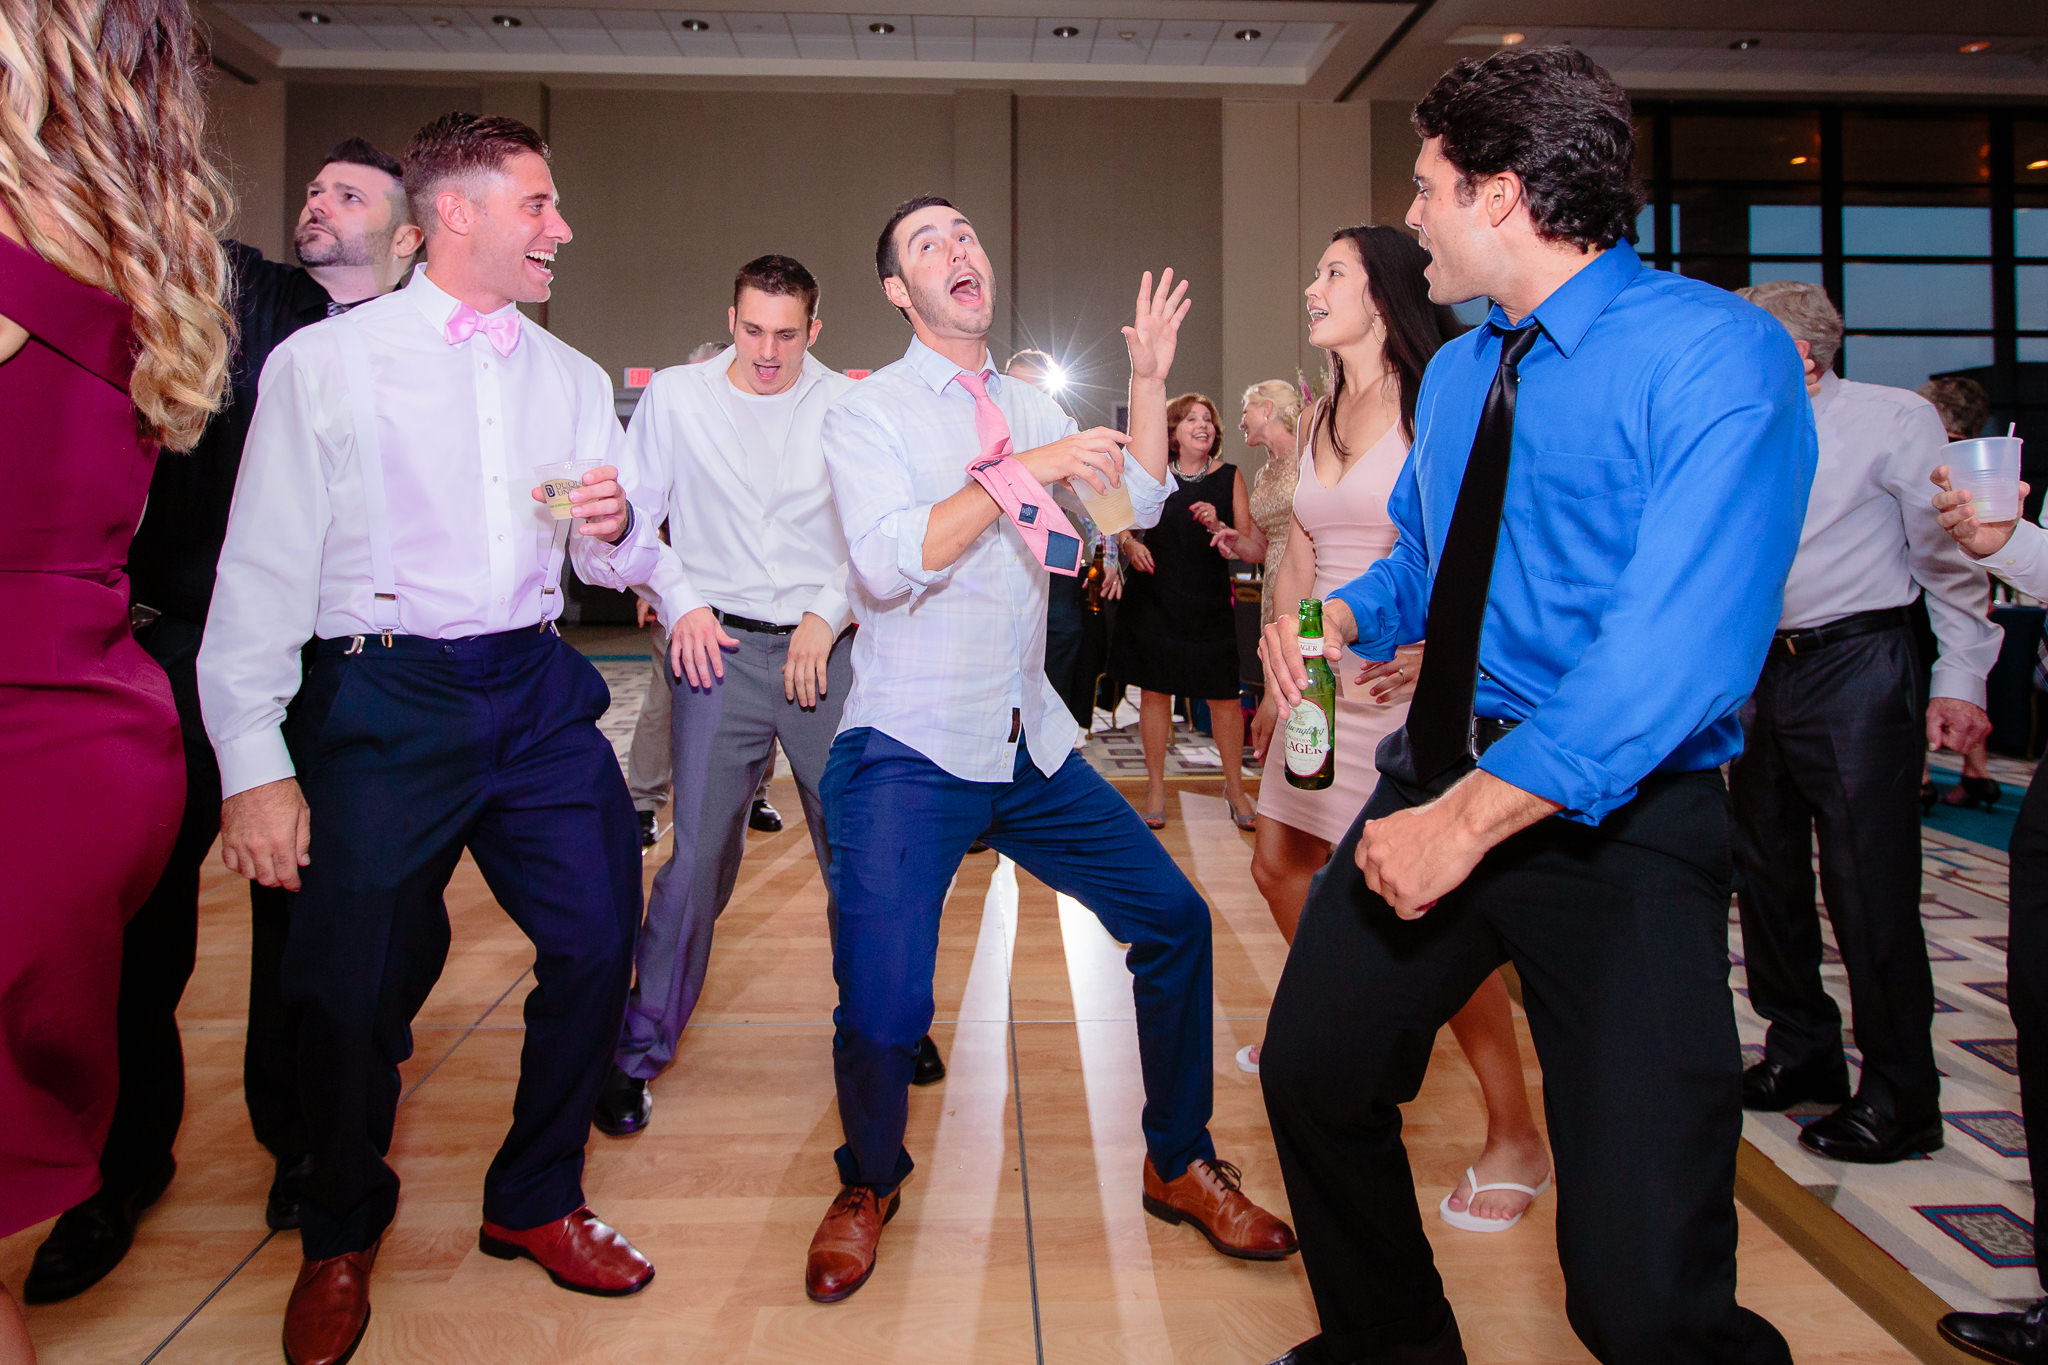 Guests dance at a Duquesne University wedding reception